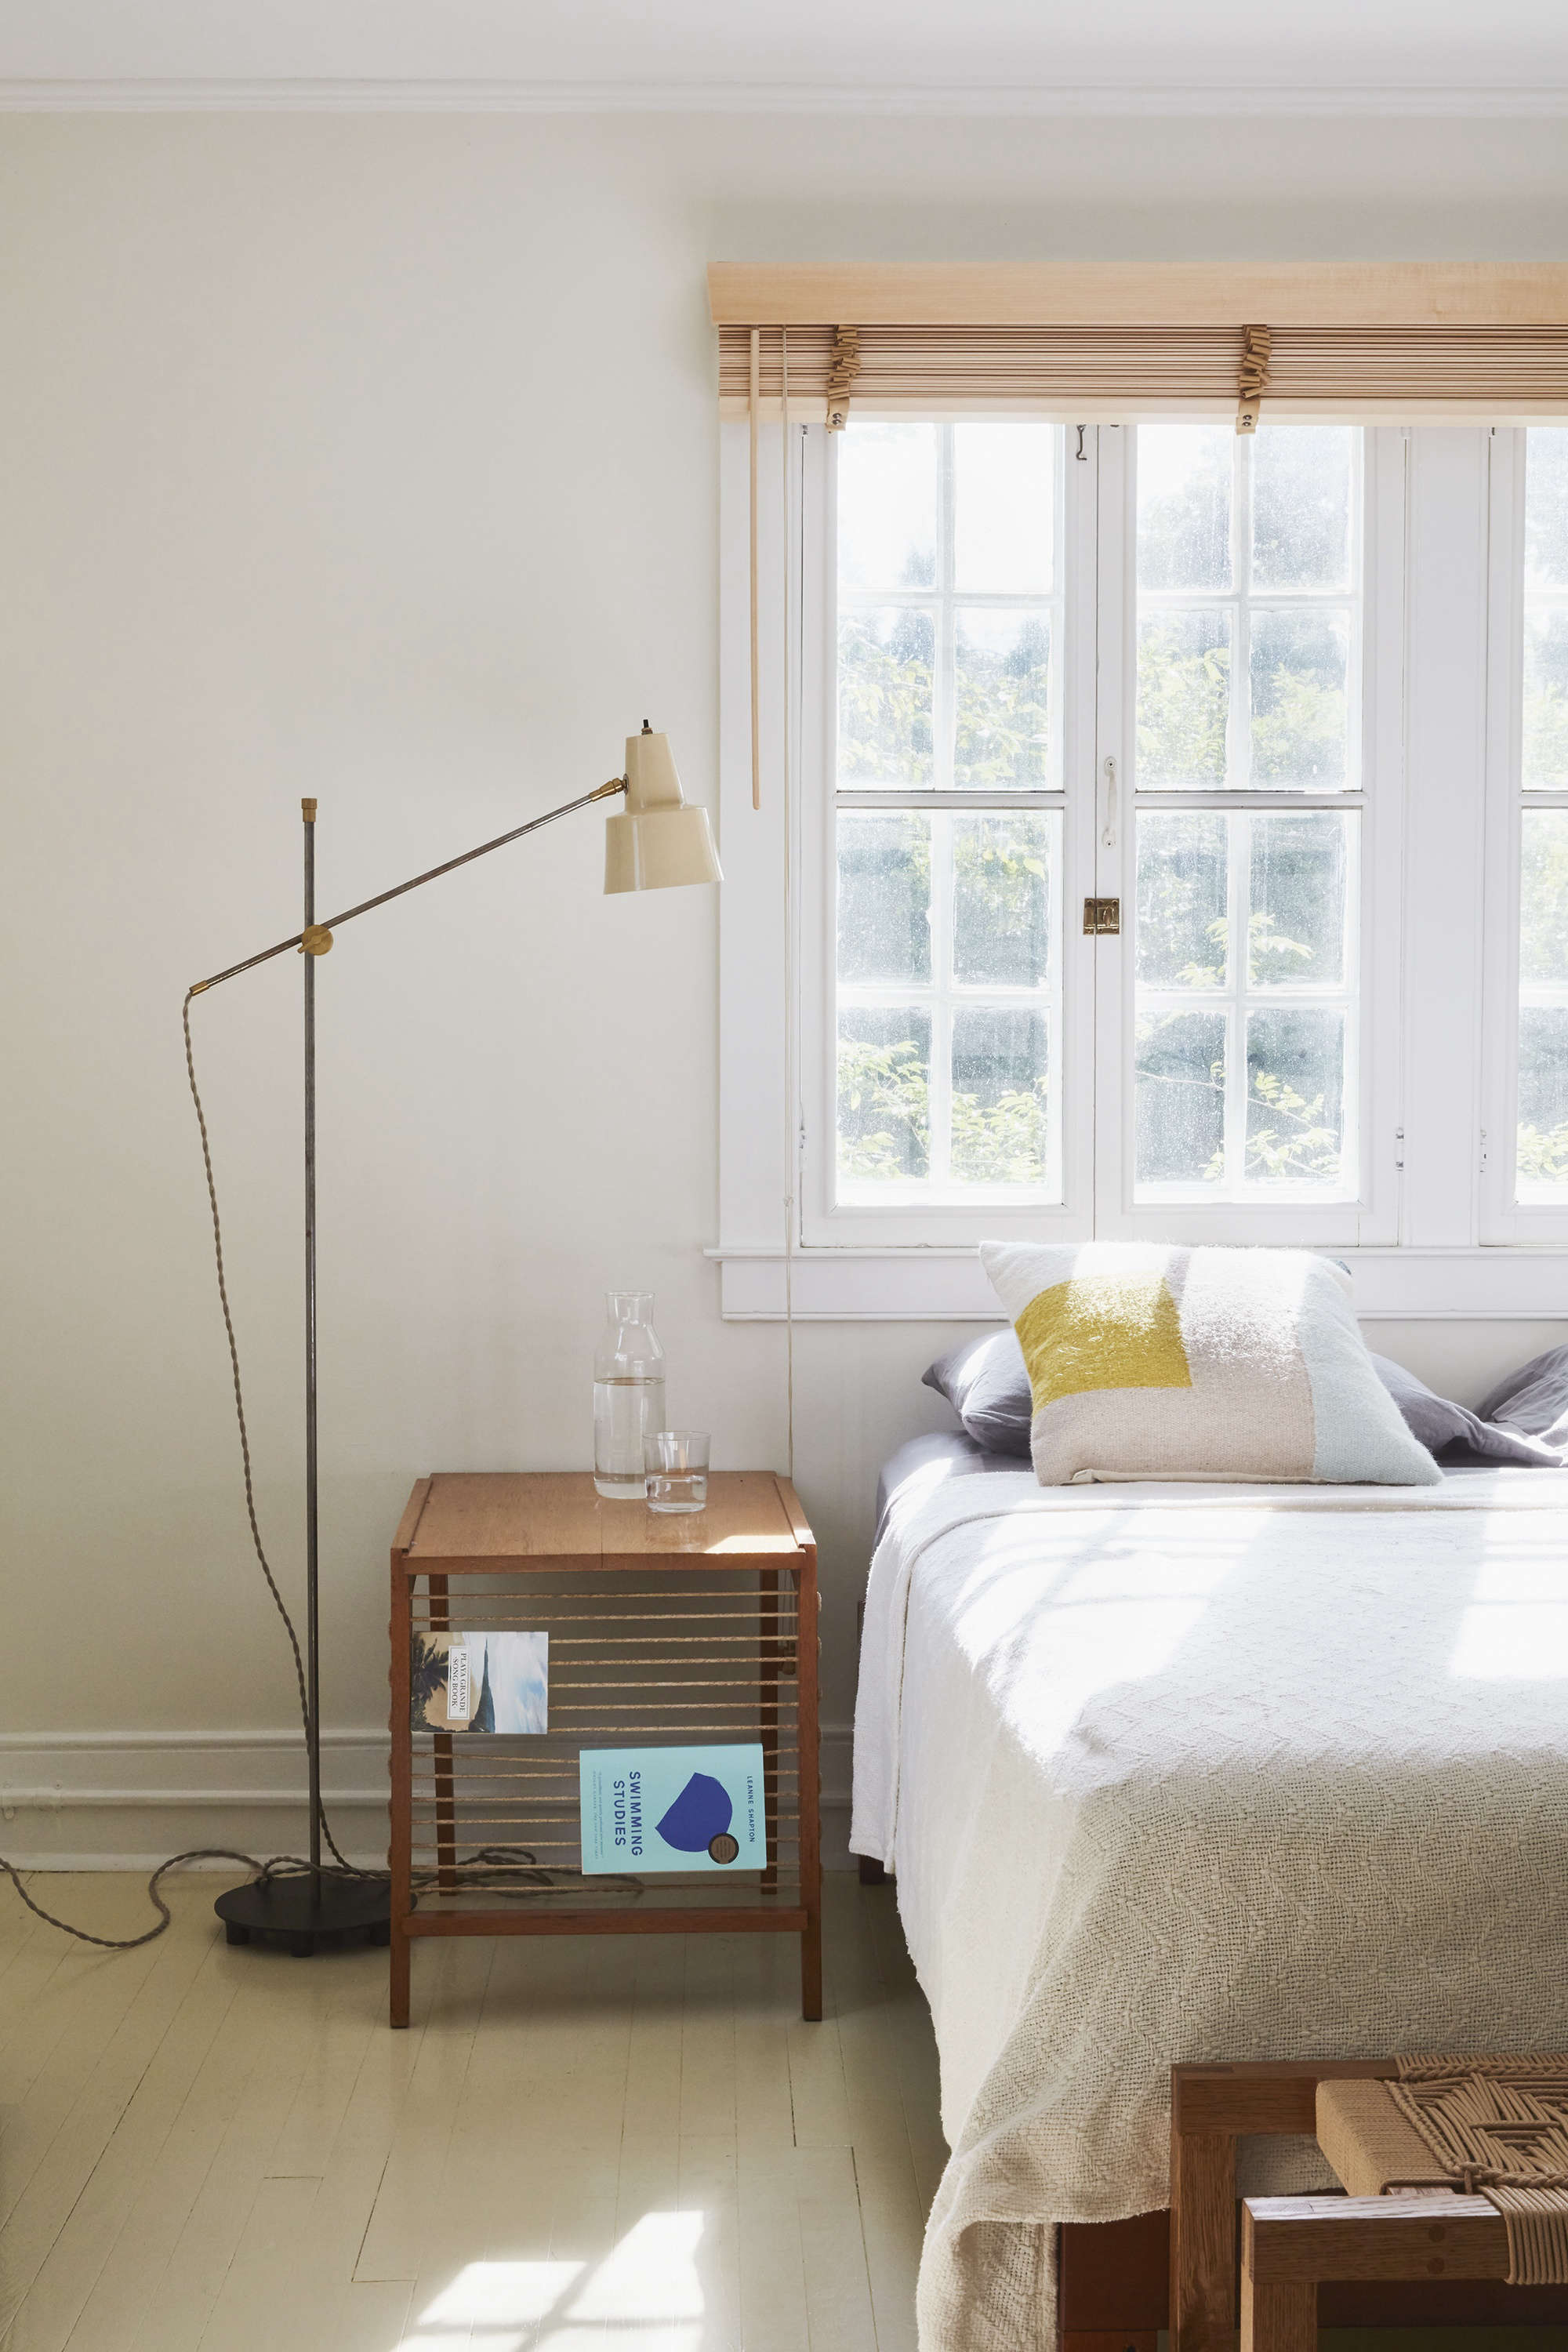 Remodeling 101 Bedside Lighting, Do Table Lamps Have To Match